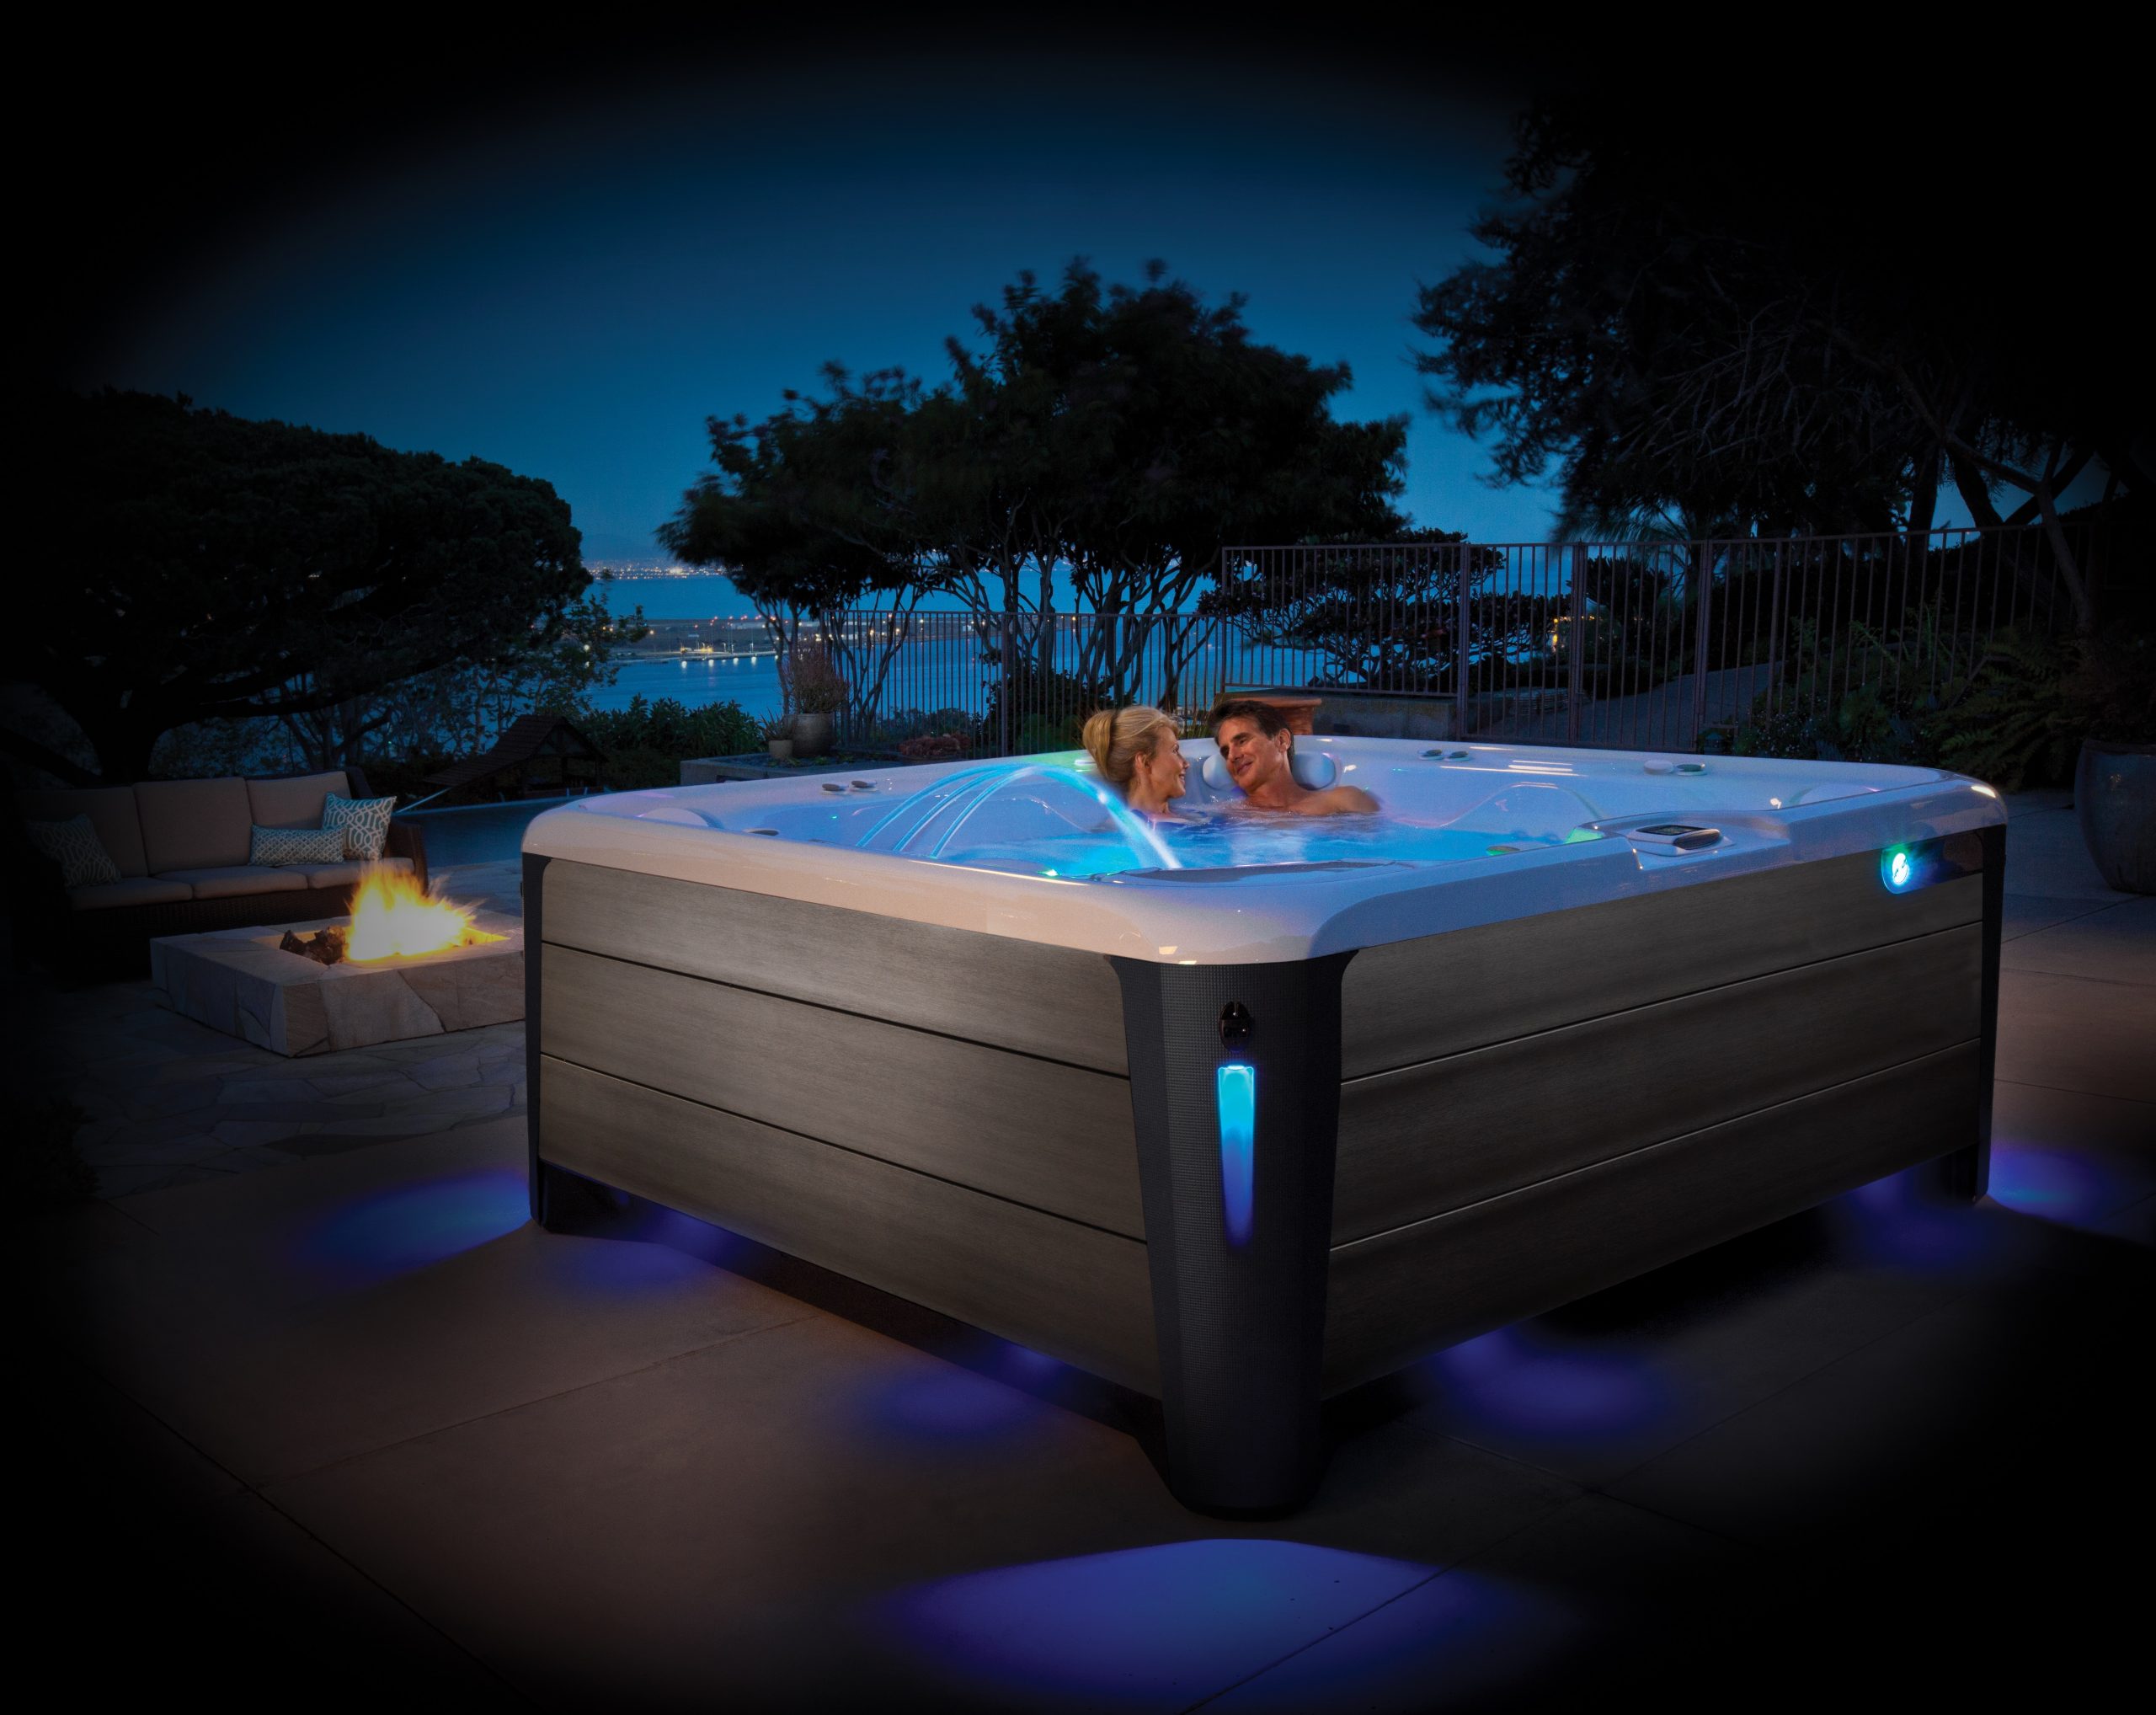 Planning The Perfect Hot Tub Date Night